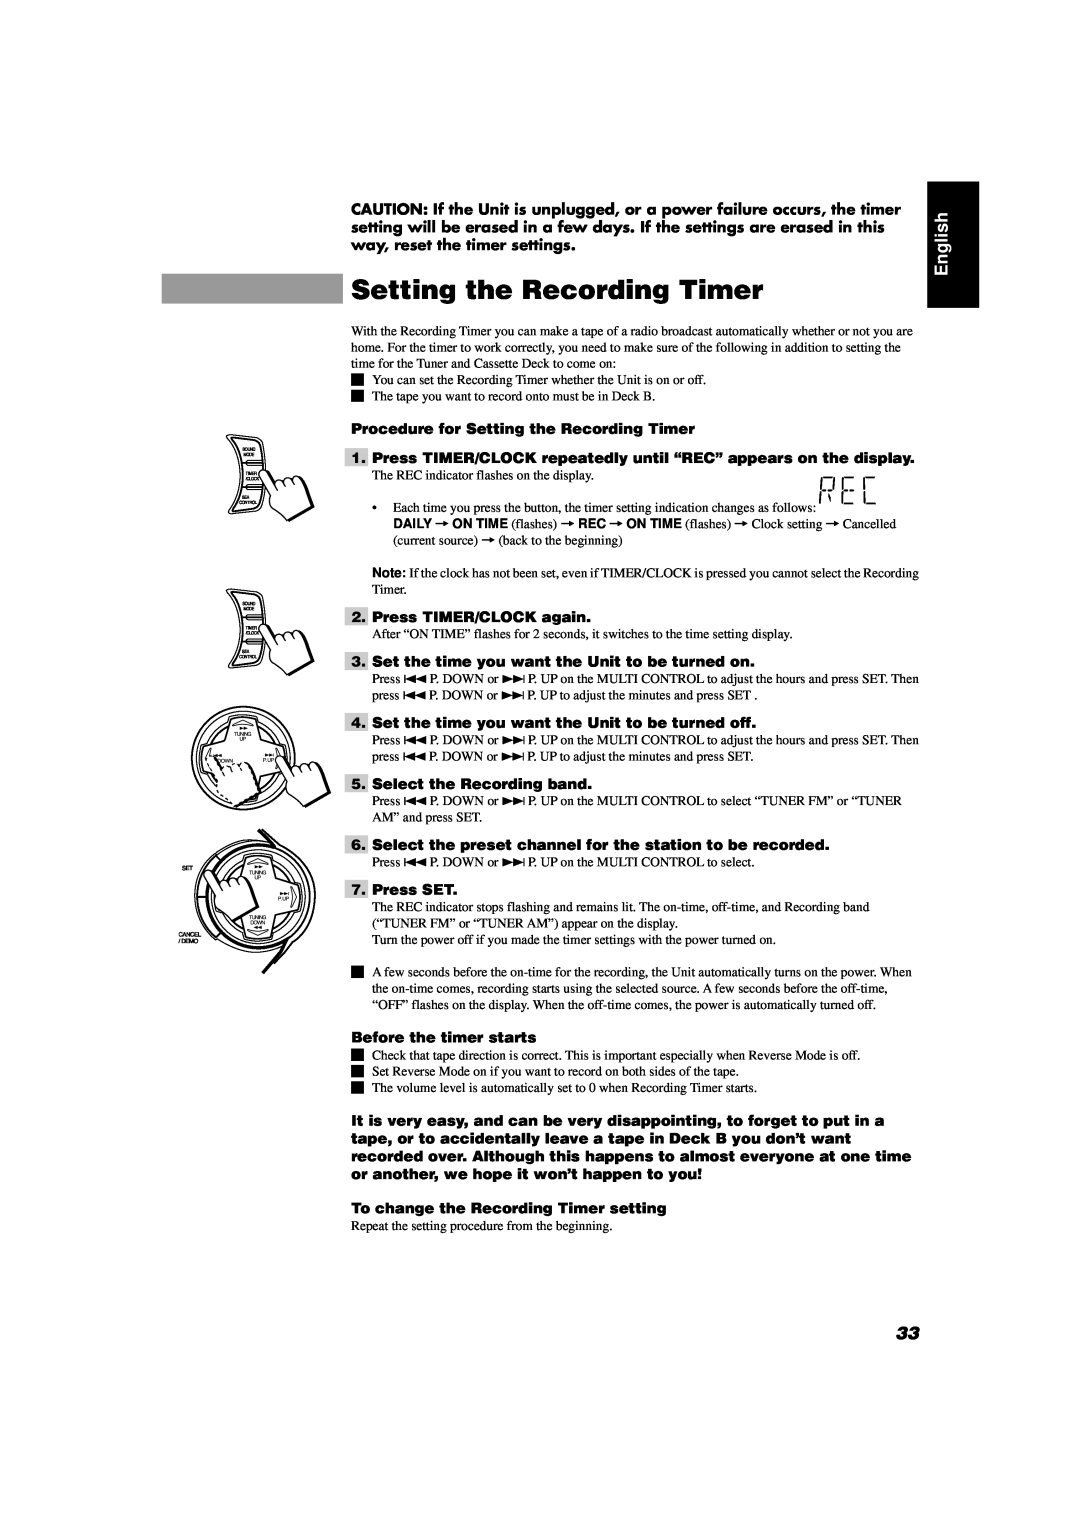 JVC CA-D452TR English, Procedure for Setting the Recording Timer, Press TIMER/CLOCK again, Select the Recording band 